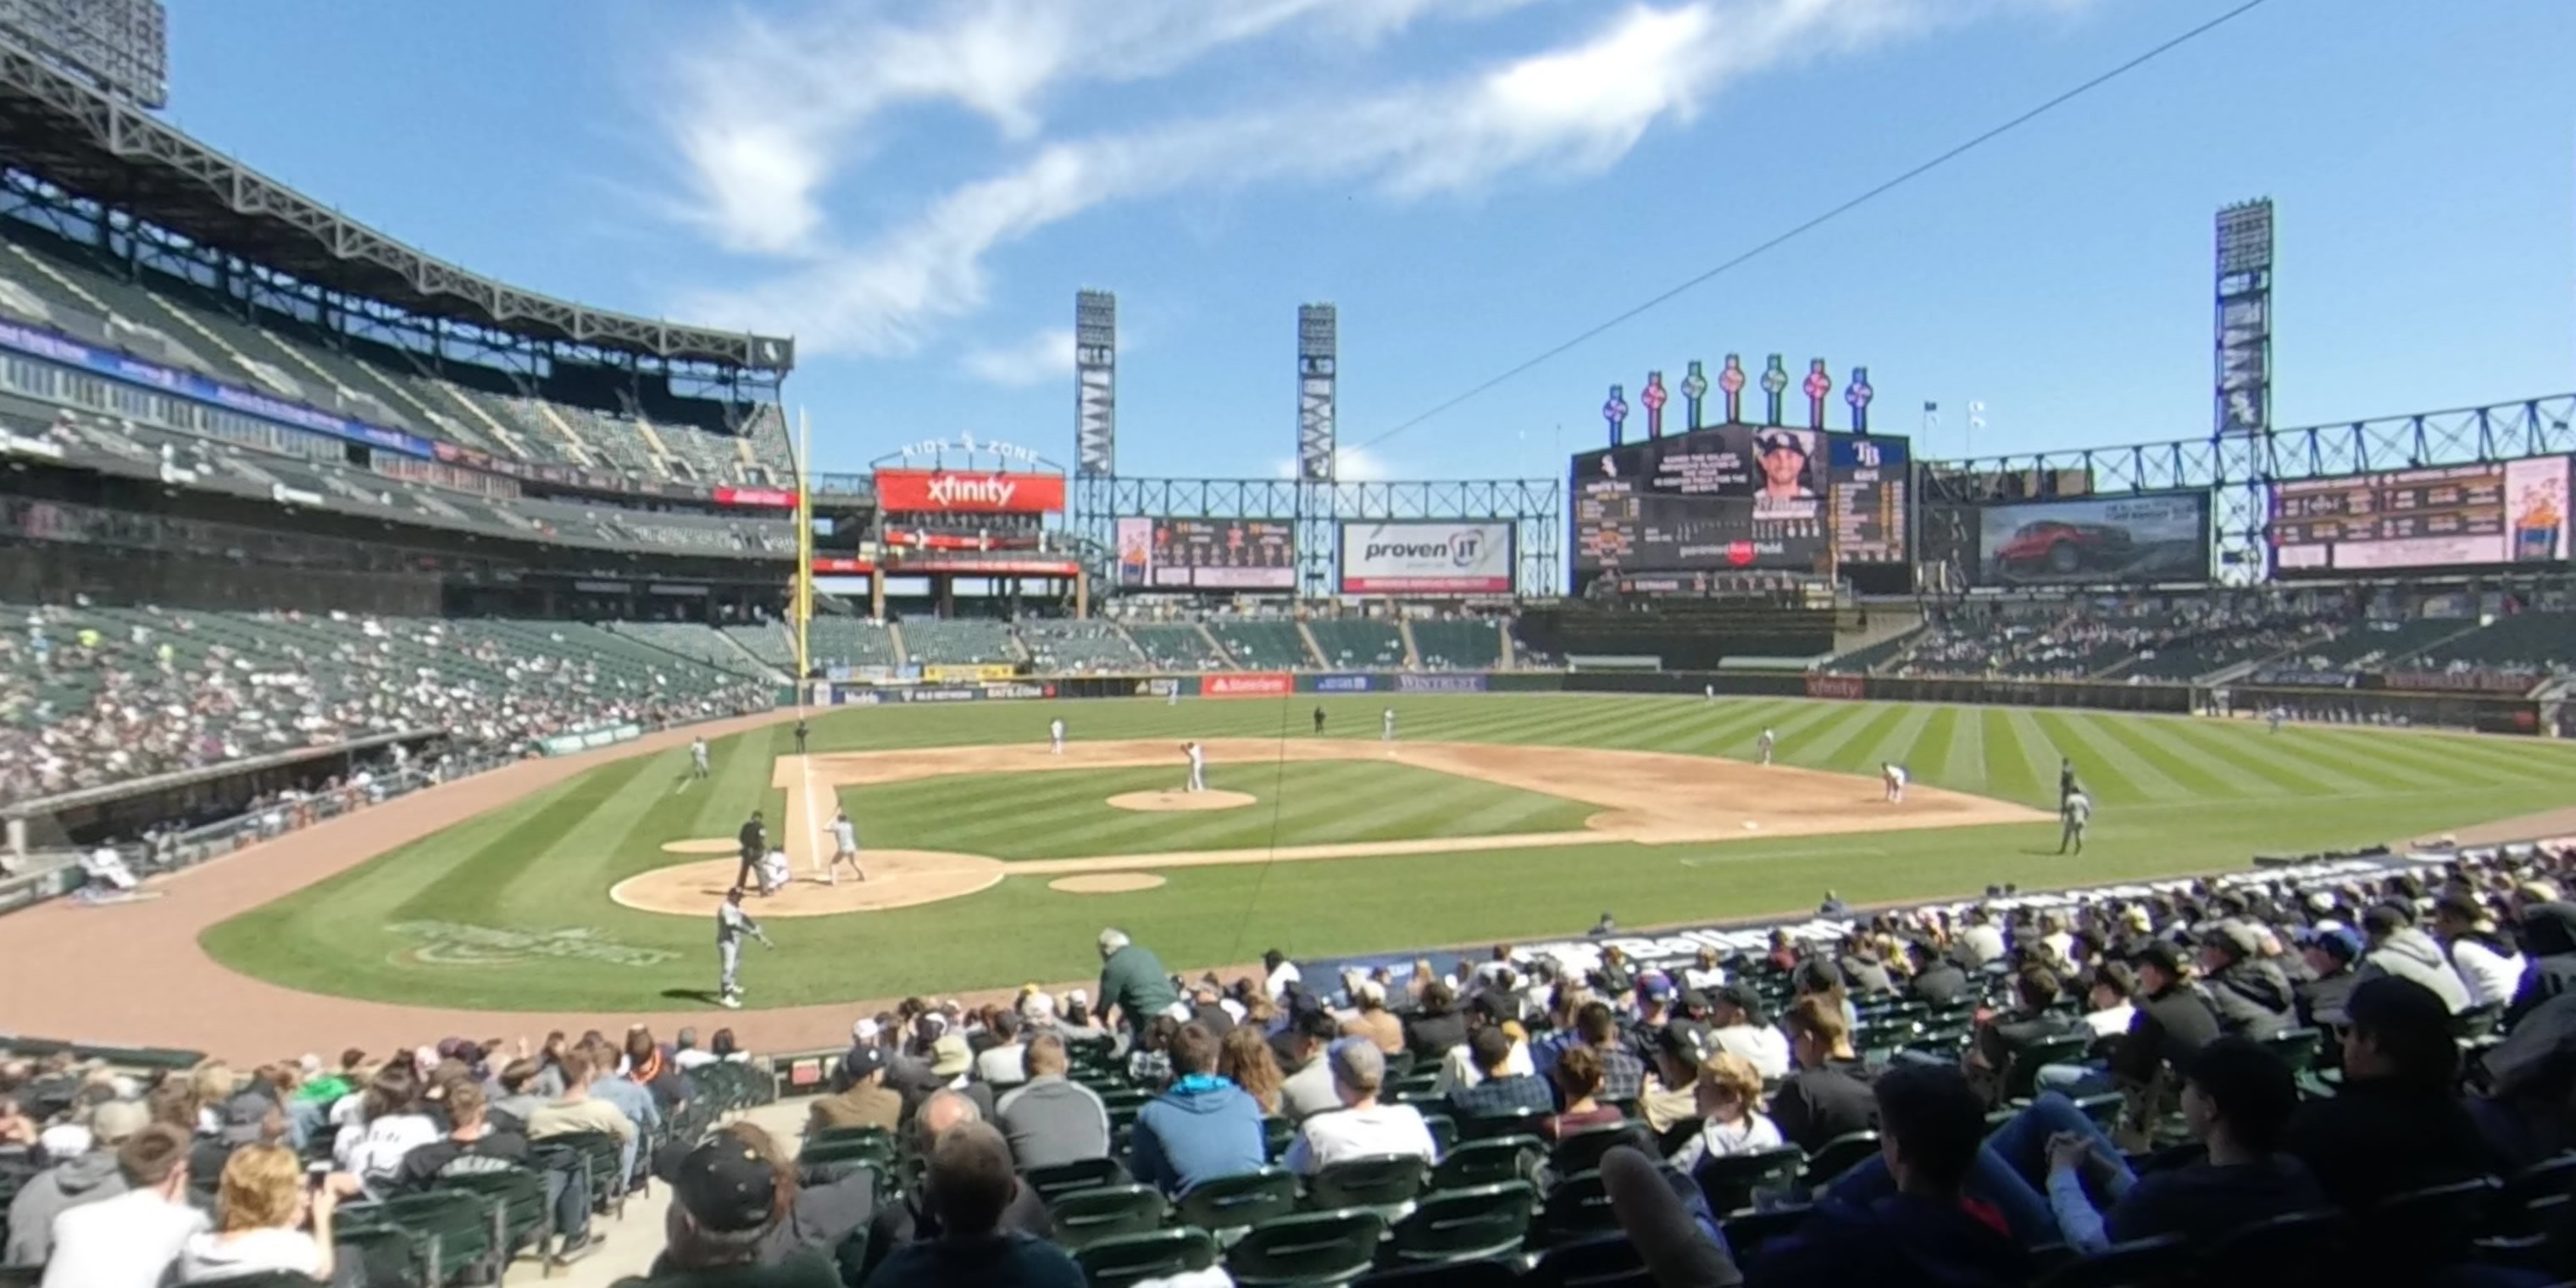 section 128 panoramic seat view  - guaranteed rate field